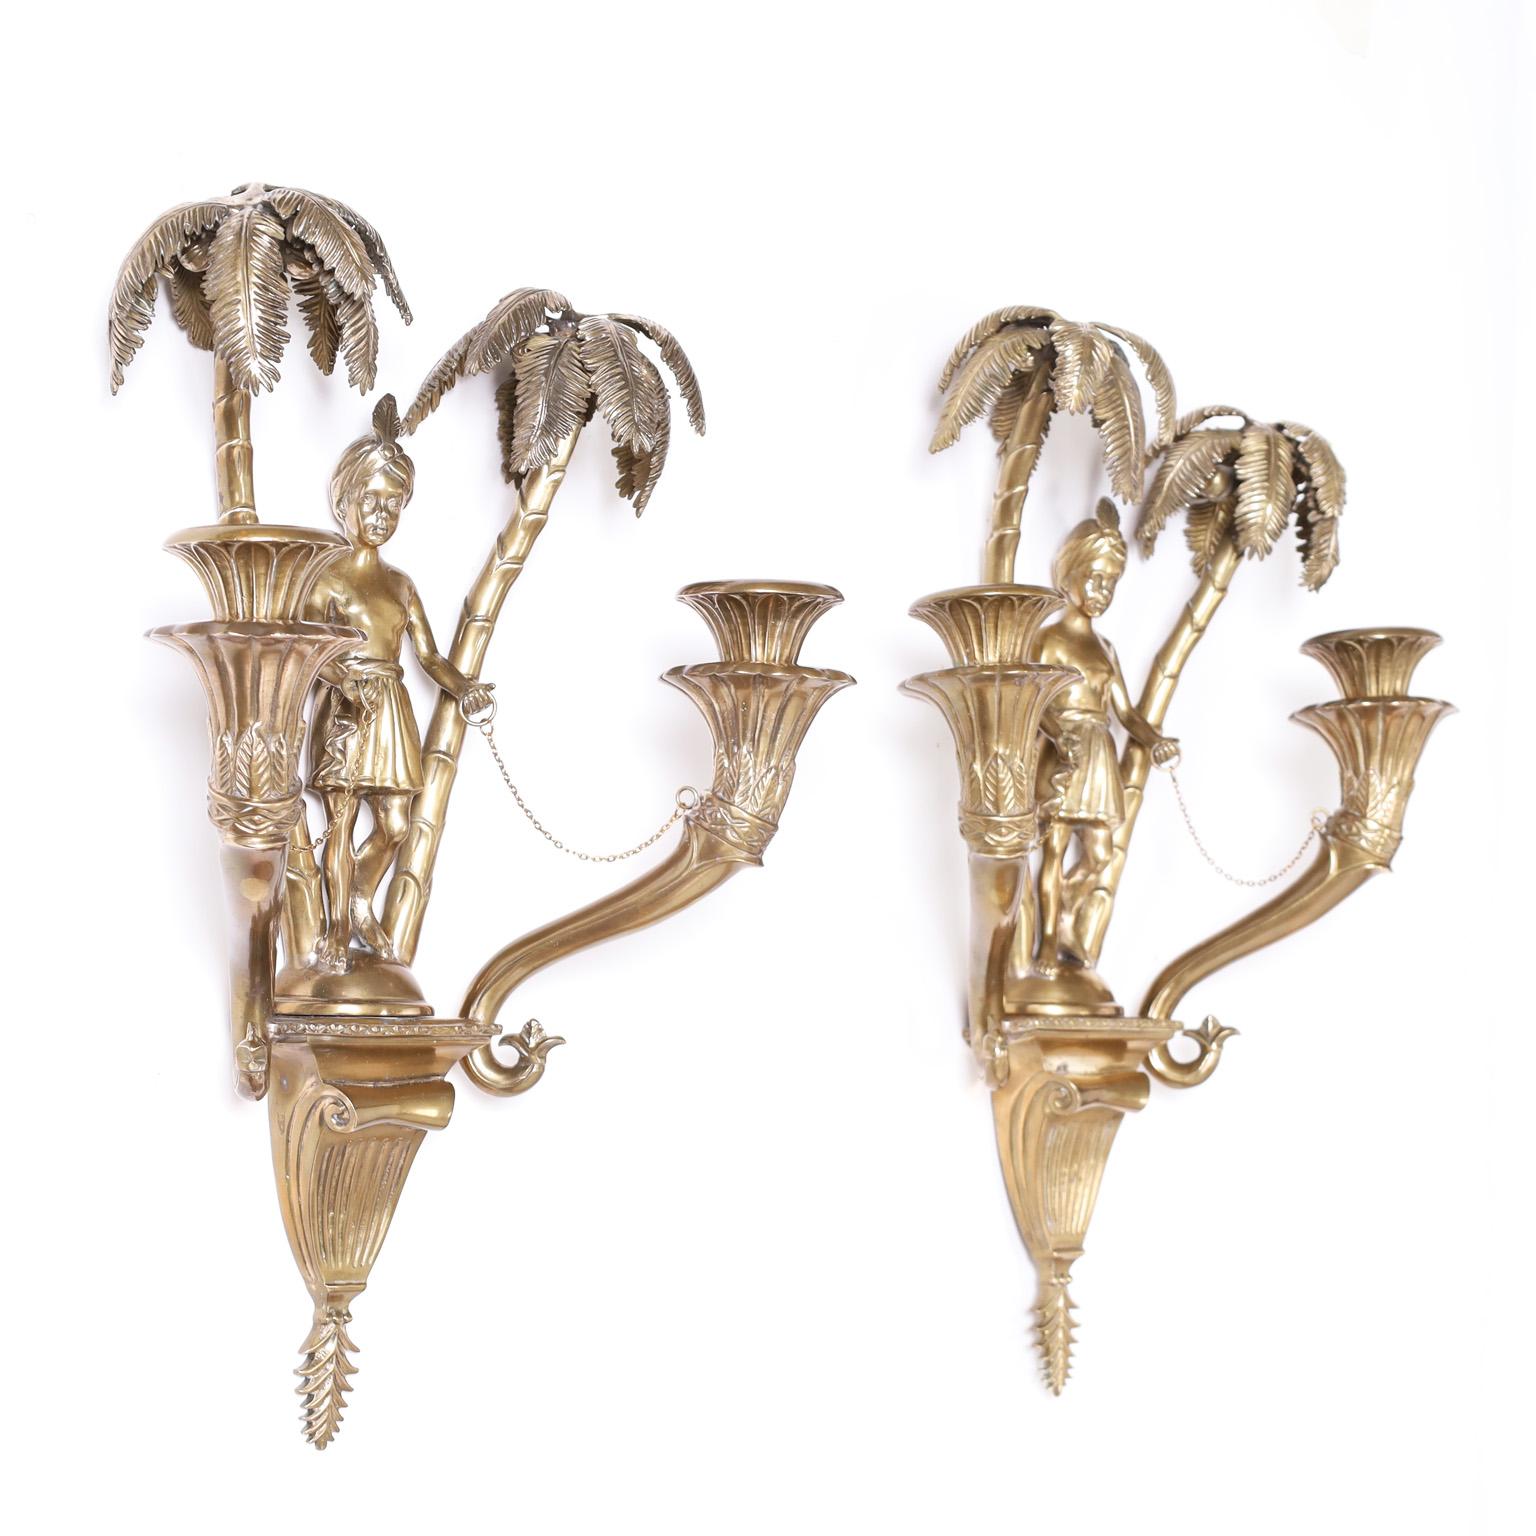 Intriguing pair of antique French Orientalist two light wall sconces with a polished bronze finish, featuring a figure with a turban under a pair of palm trees.